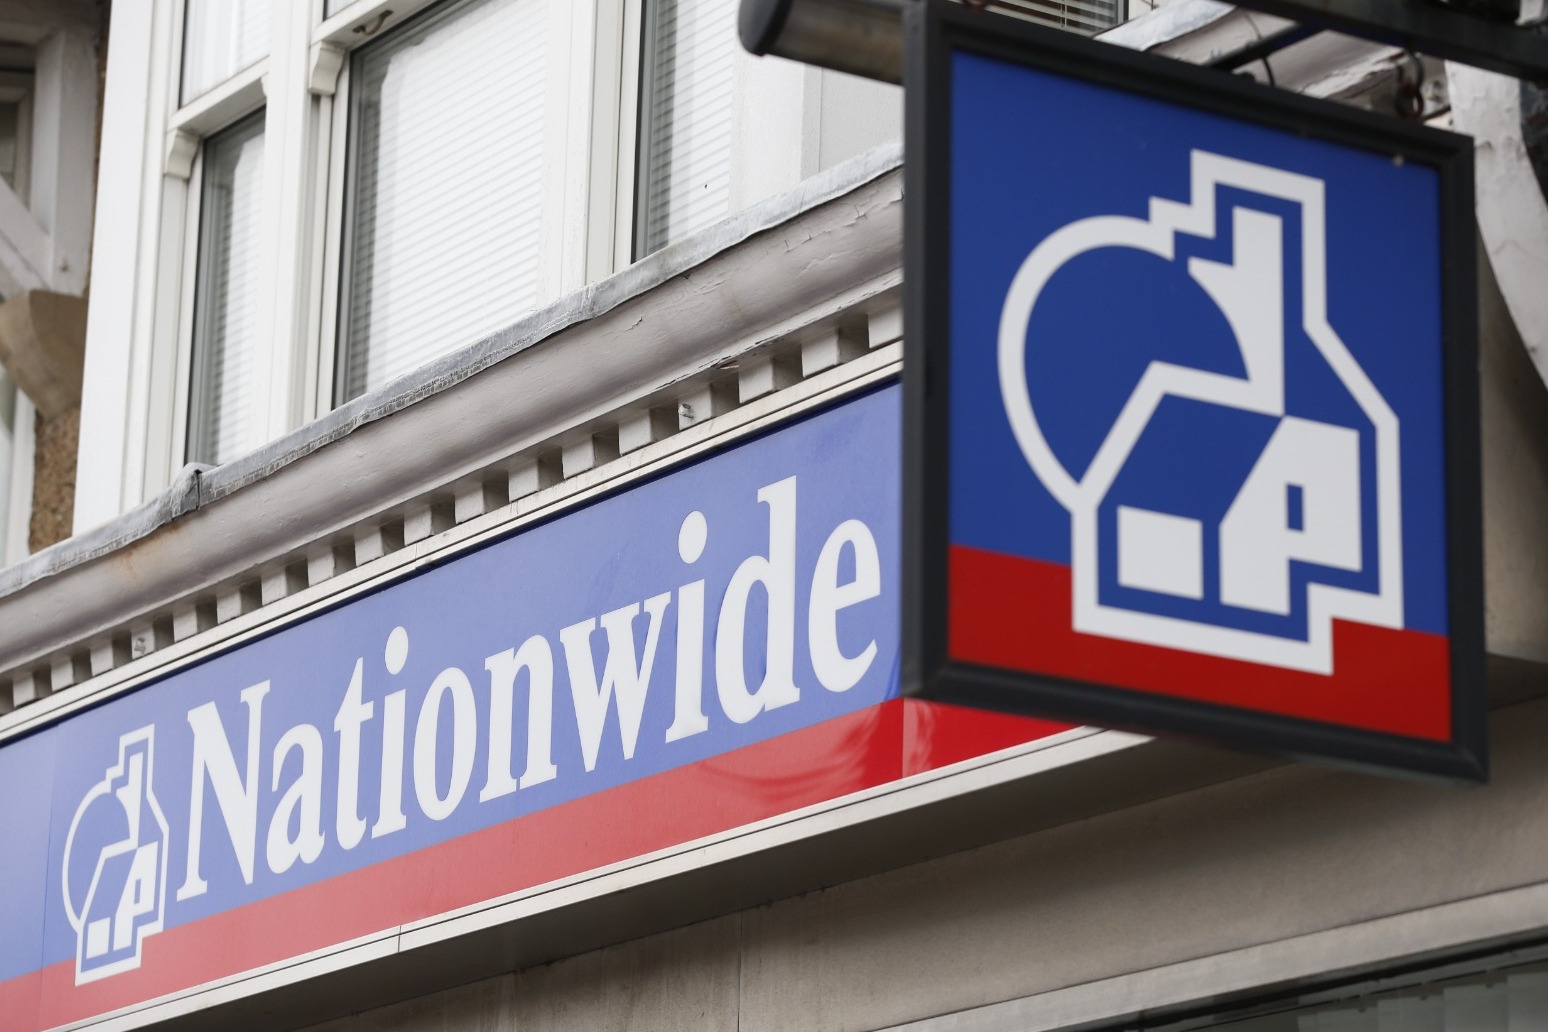 Nationwide sees profits jump but braces for loan losses 